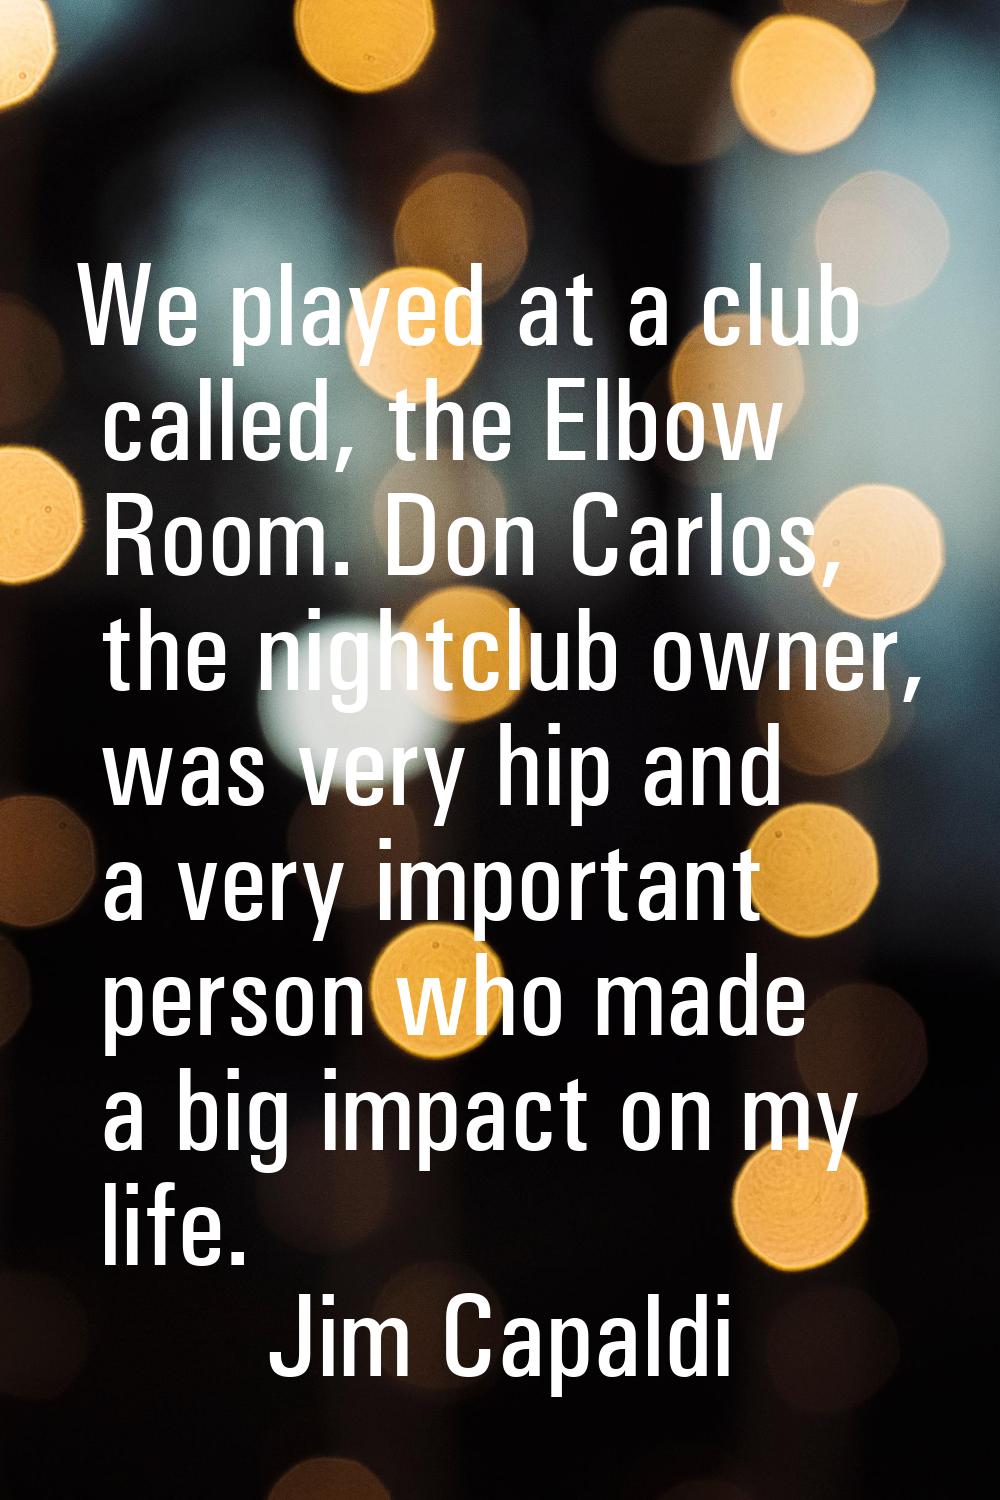 We played at a club called, the Elbow Room. Don Carlos, the nightclub owner, was very hip and a ver